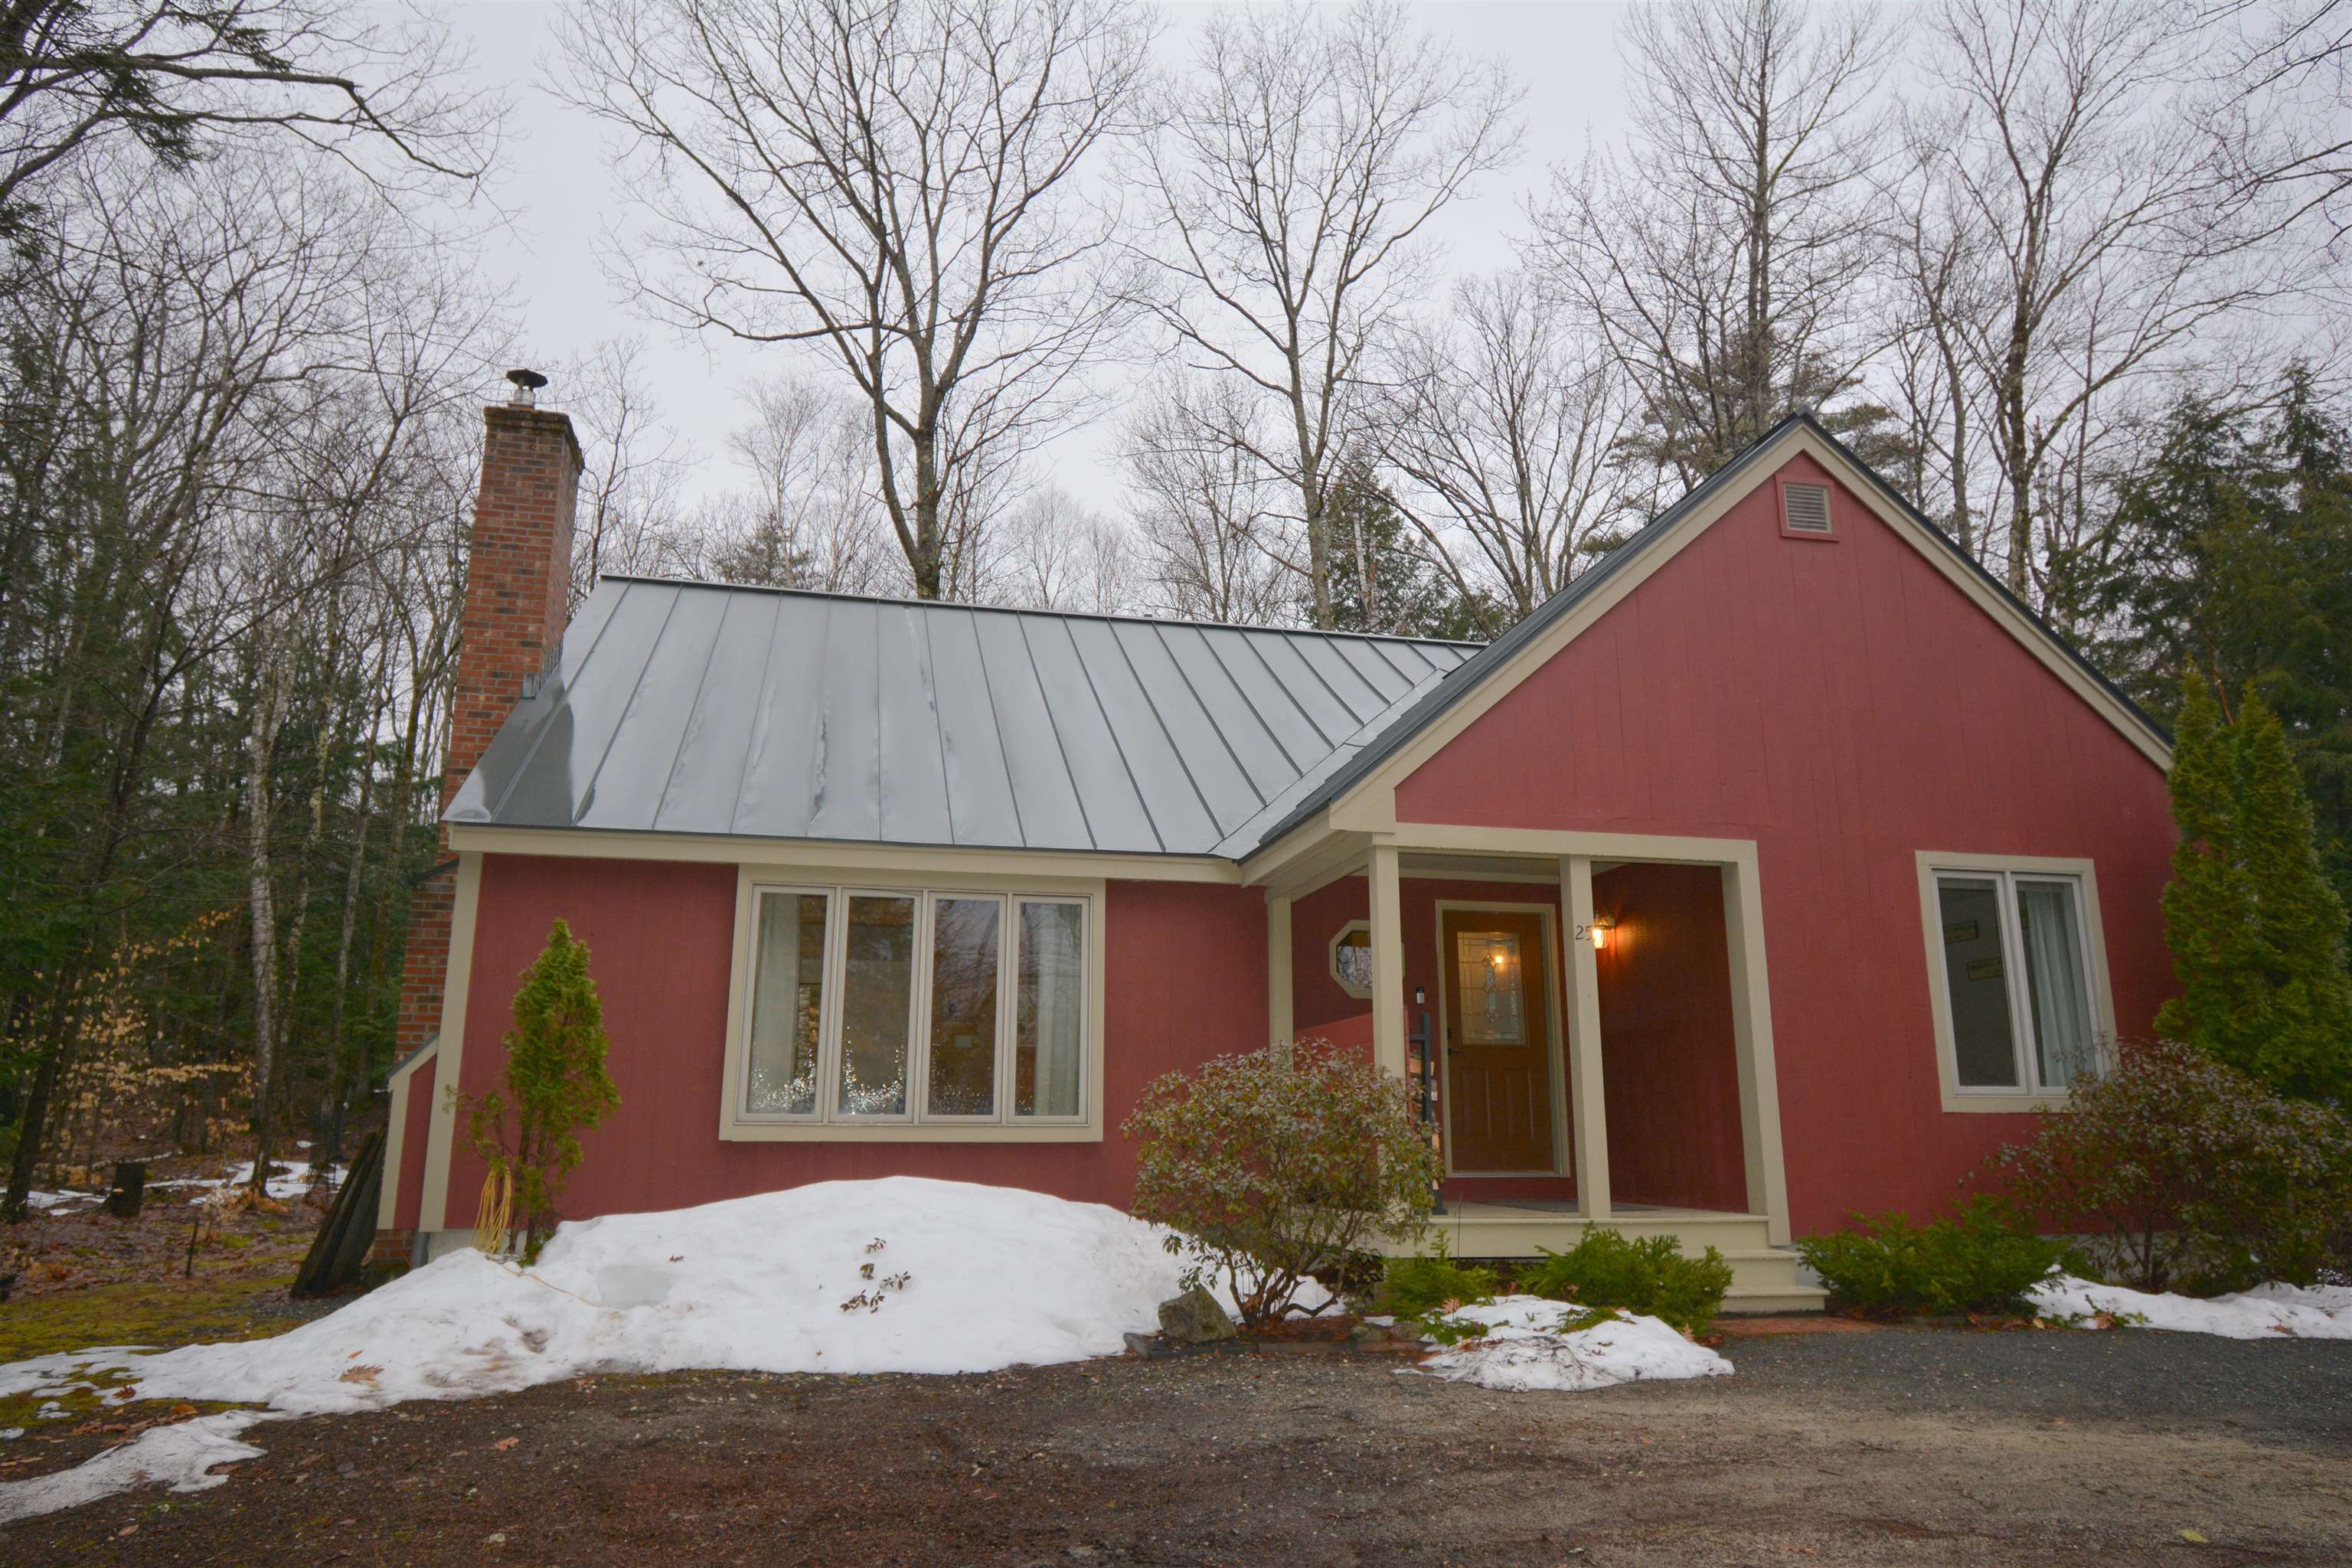 Village of Eastman in Town of Grantham NH Home for sale $$437,025 $276 per sq.ft.